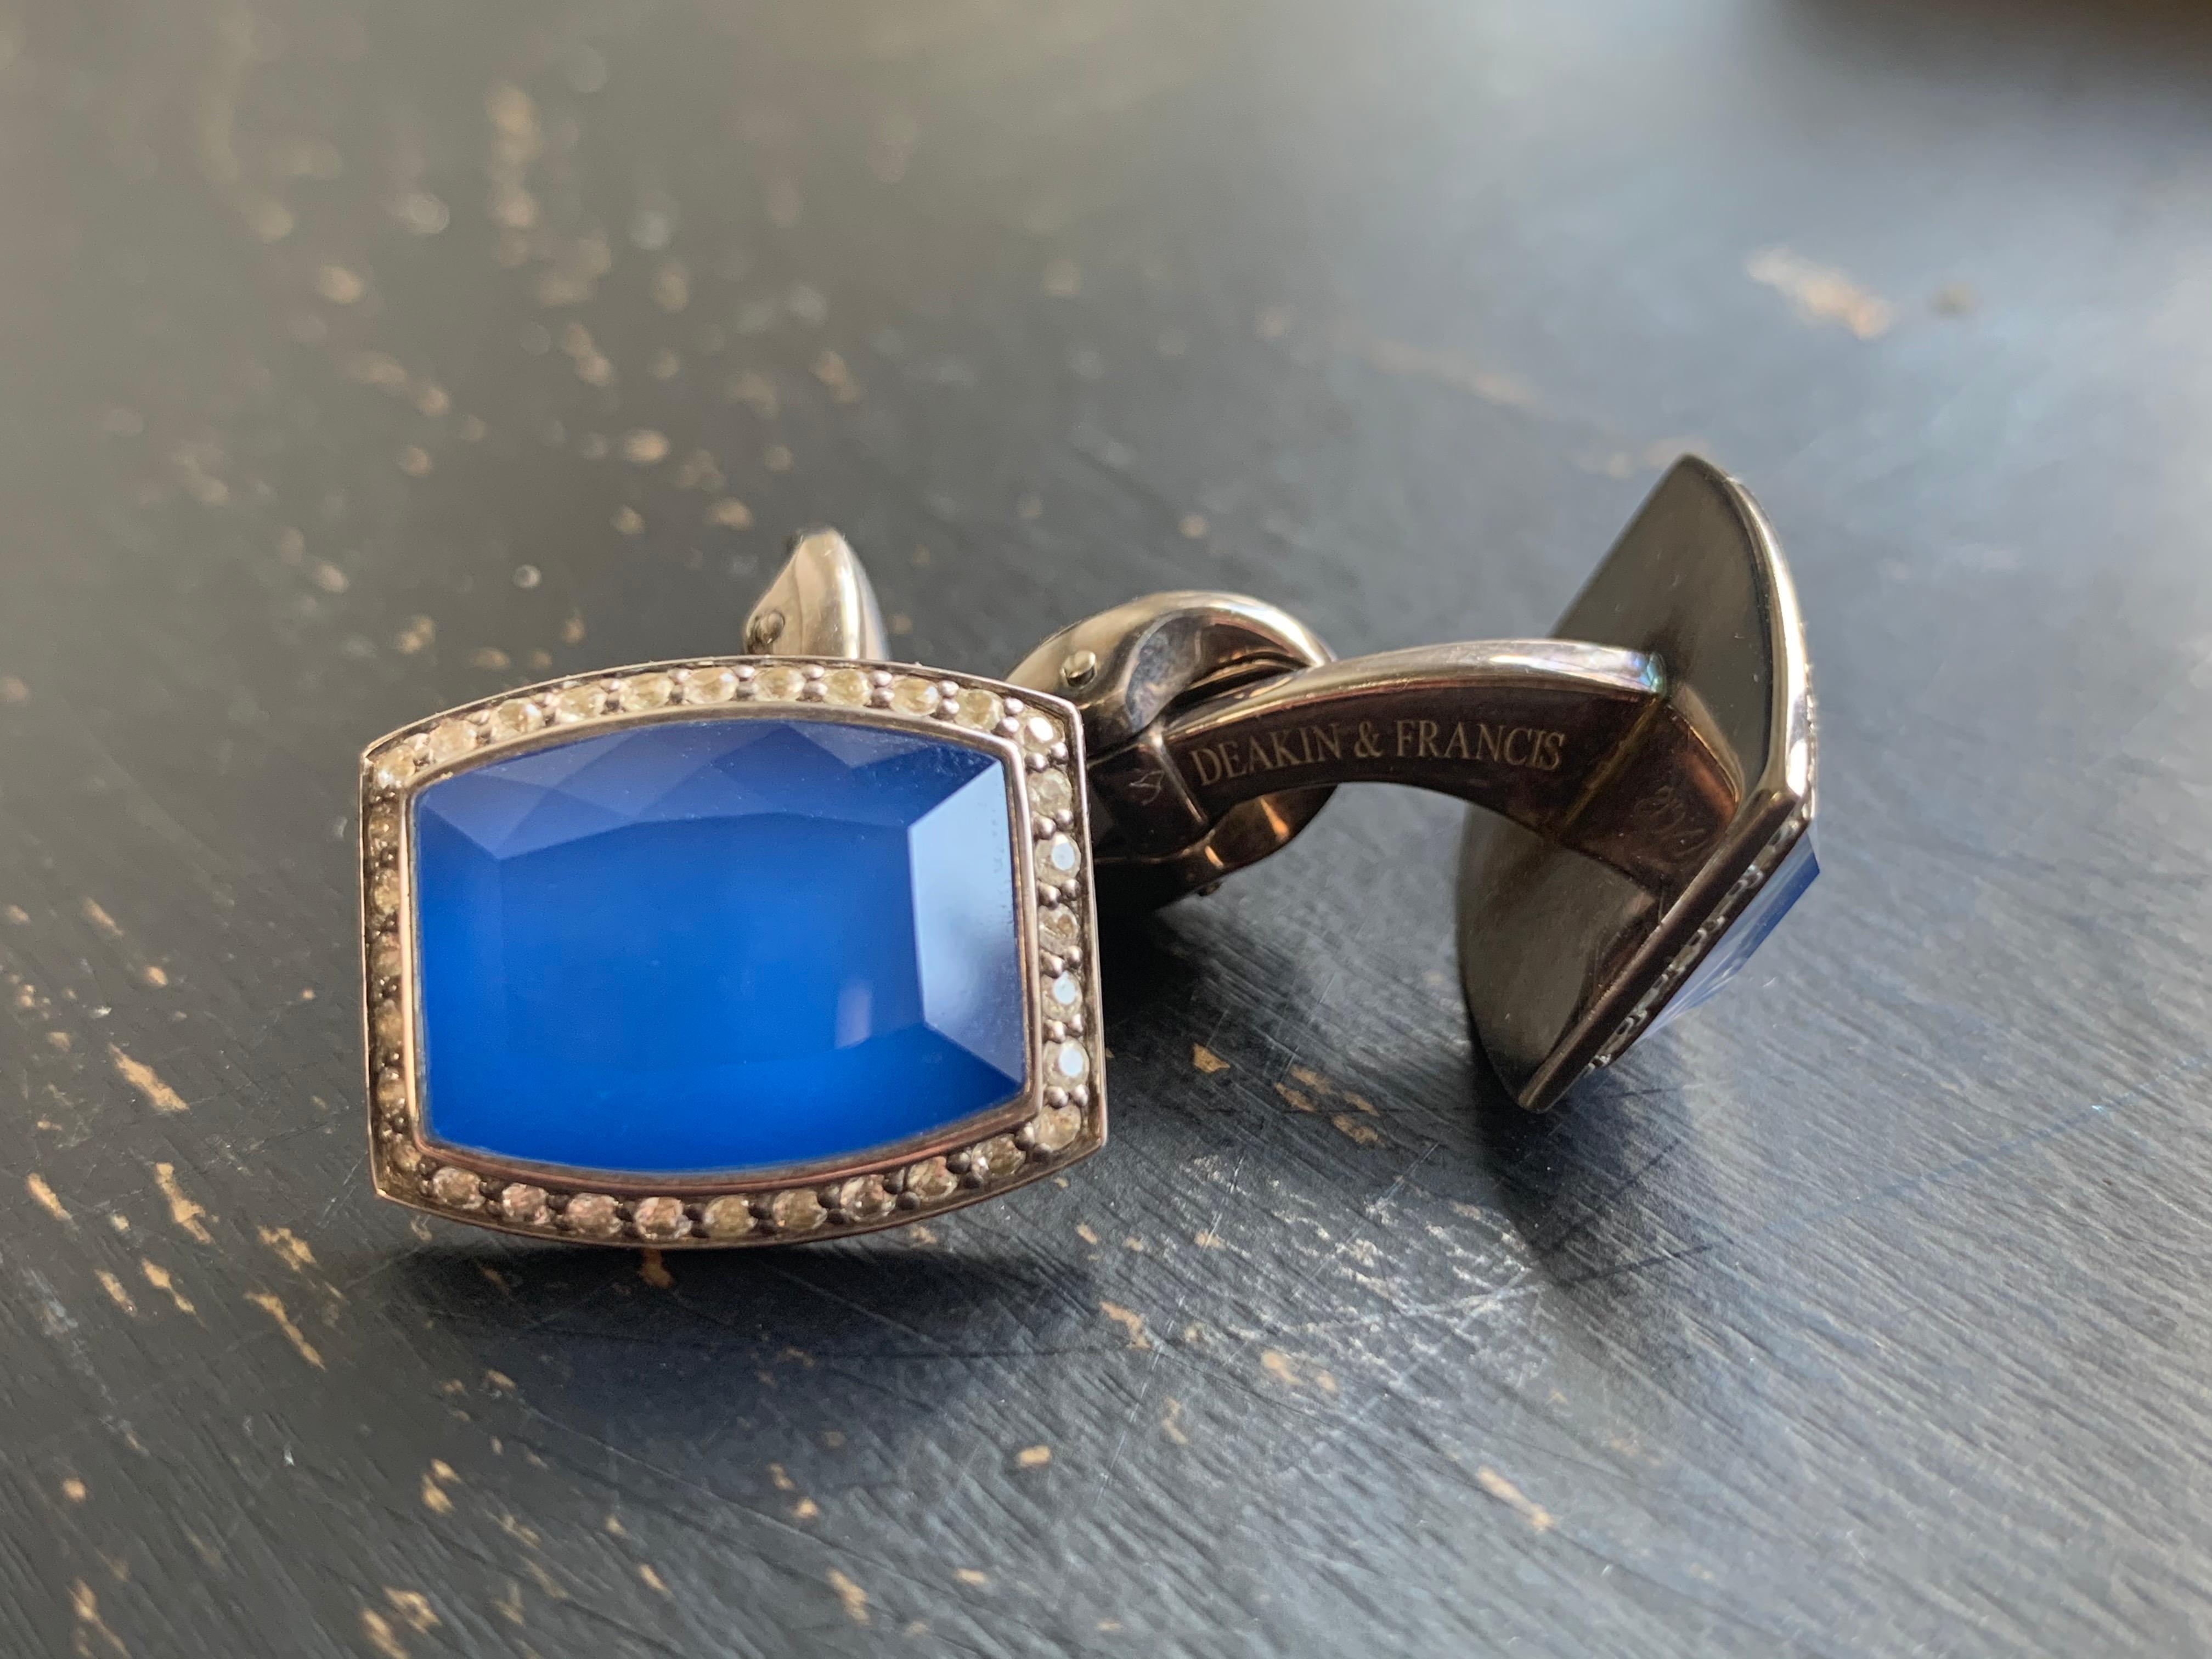 Beautiful, blue Barrel Shaped Cufflinks in Sterling Silver are edged in White Sapphire pave surrounding a doublet of Crystal Quartz and synthetic blue chalcedony.
England's oldest and most respected cufflink company was founded in 1786 and is in its